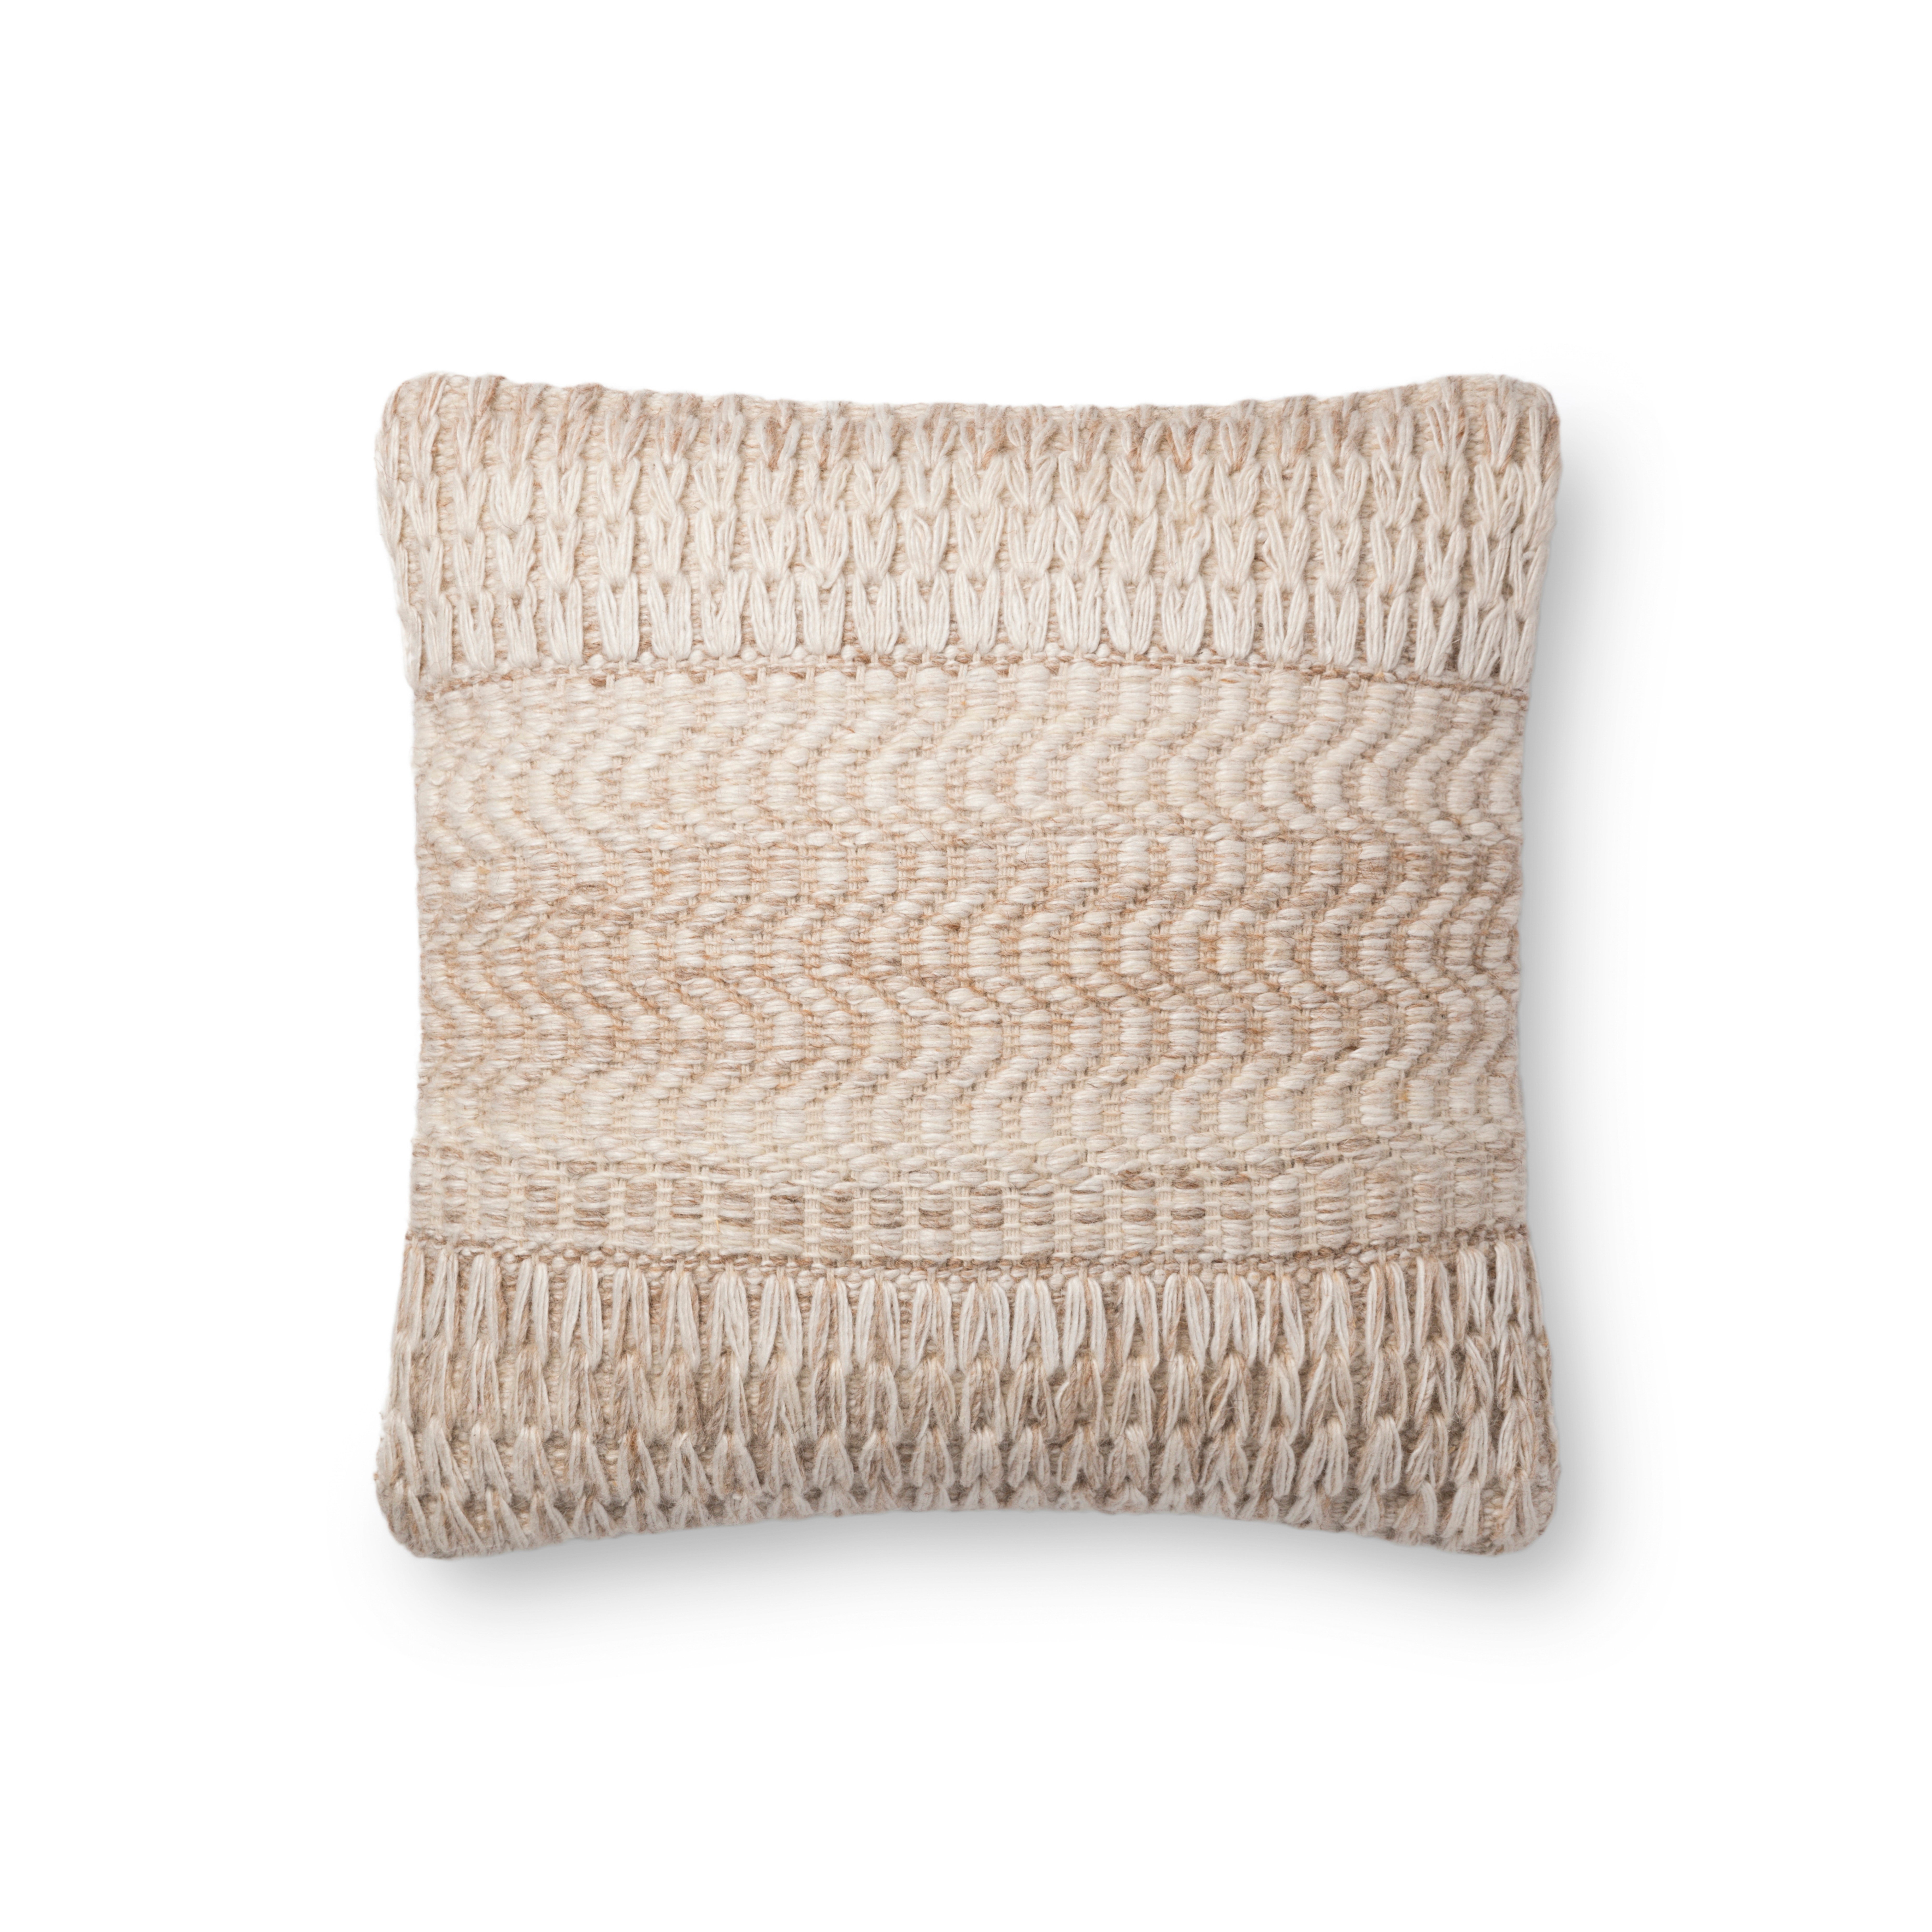 Loloi PILLOWS P0697 Sand 18" x 18" Cover Only - Loloi Rugs